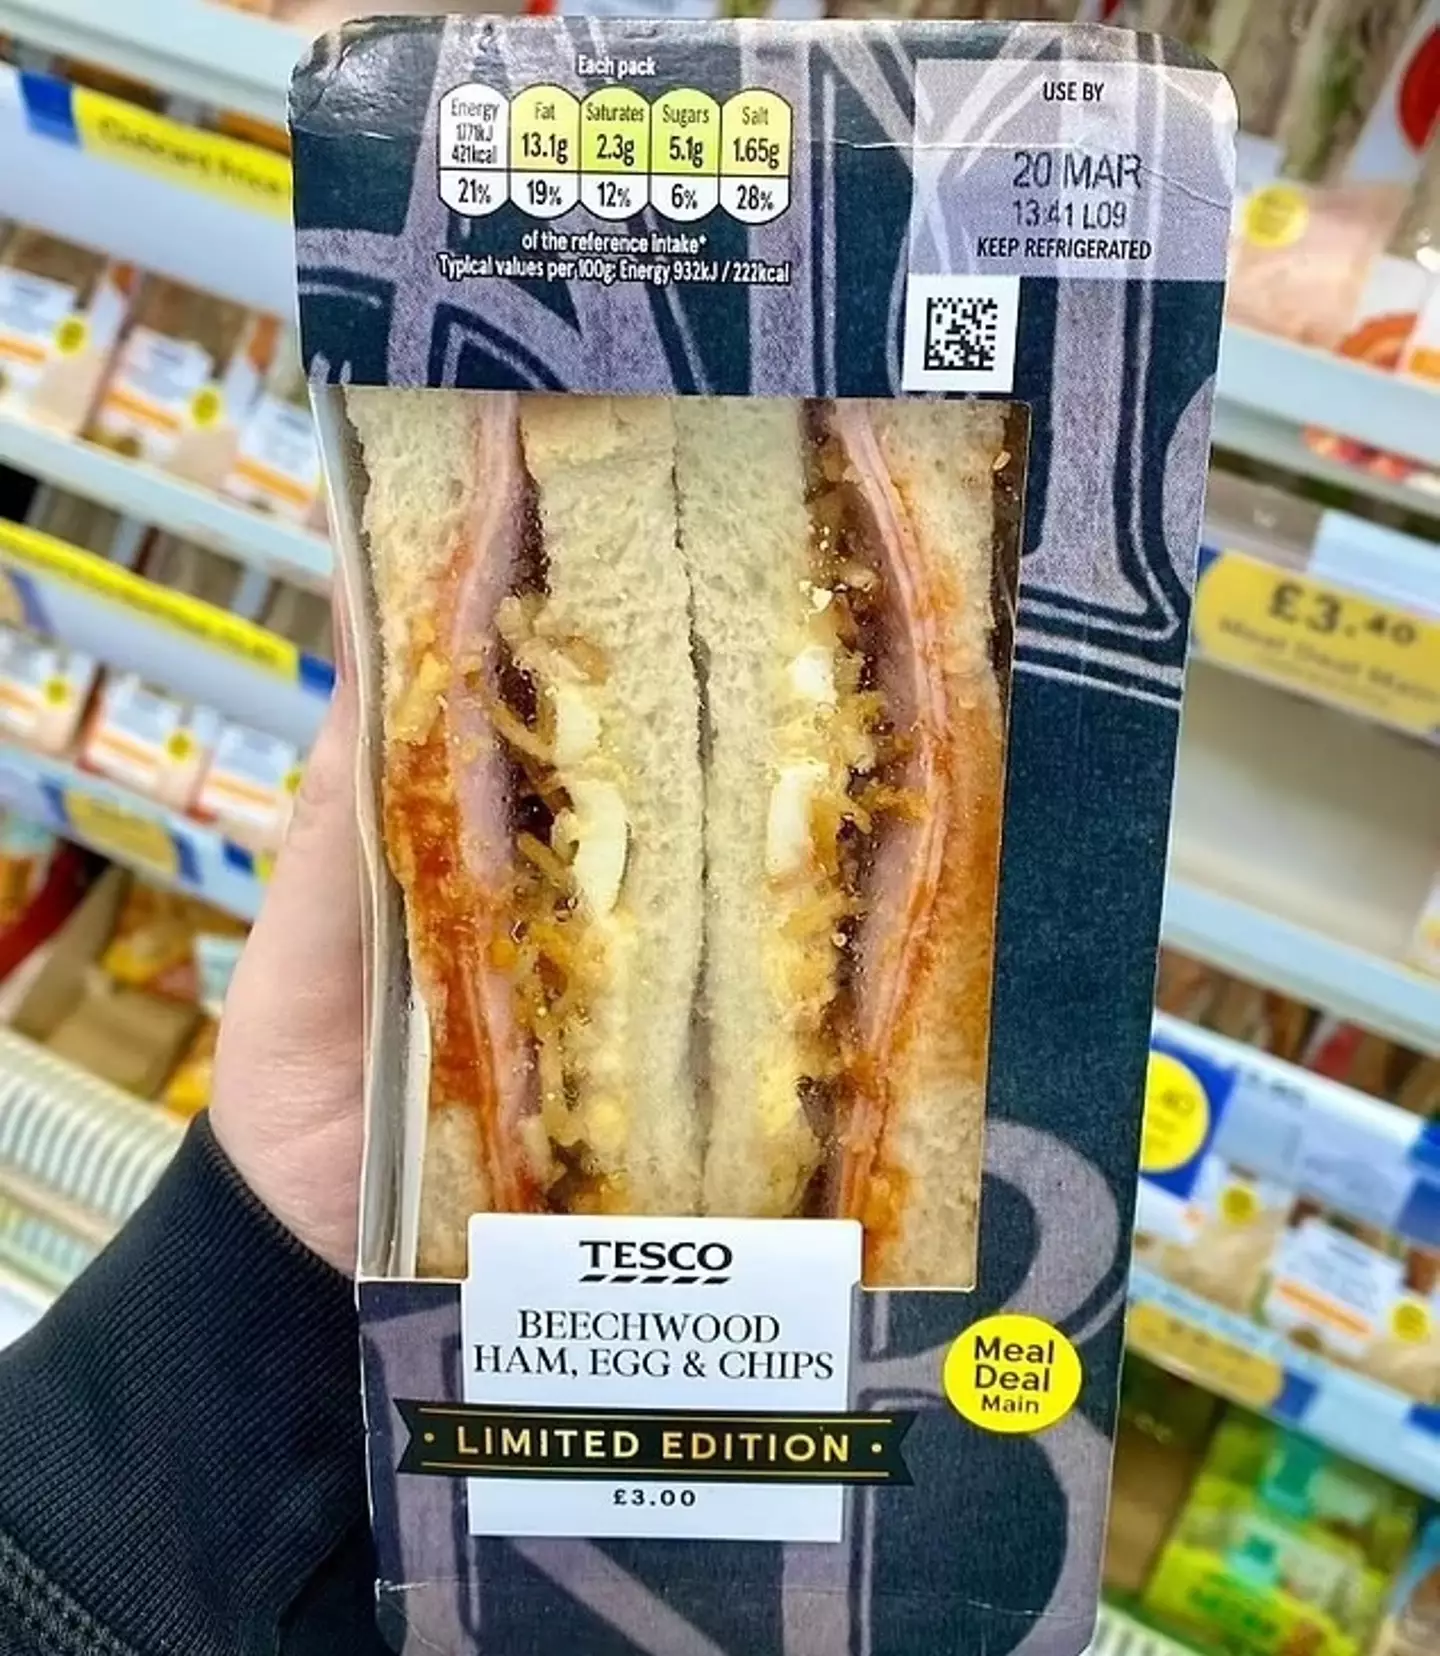 Tesco has launched a new sandwich based on an 'old classic' and shoppers are 'on a mission' to give it a try.